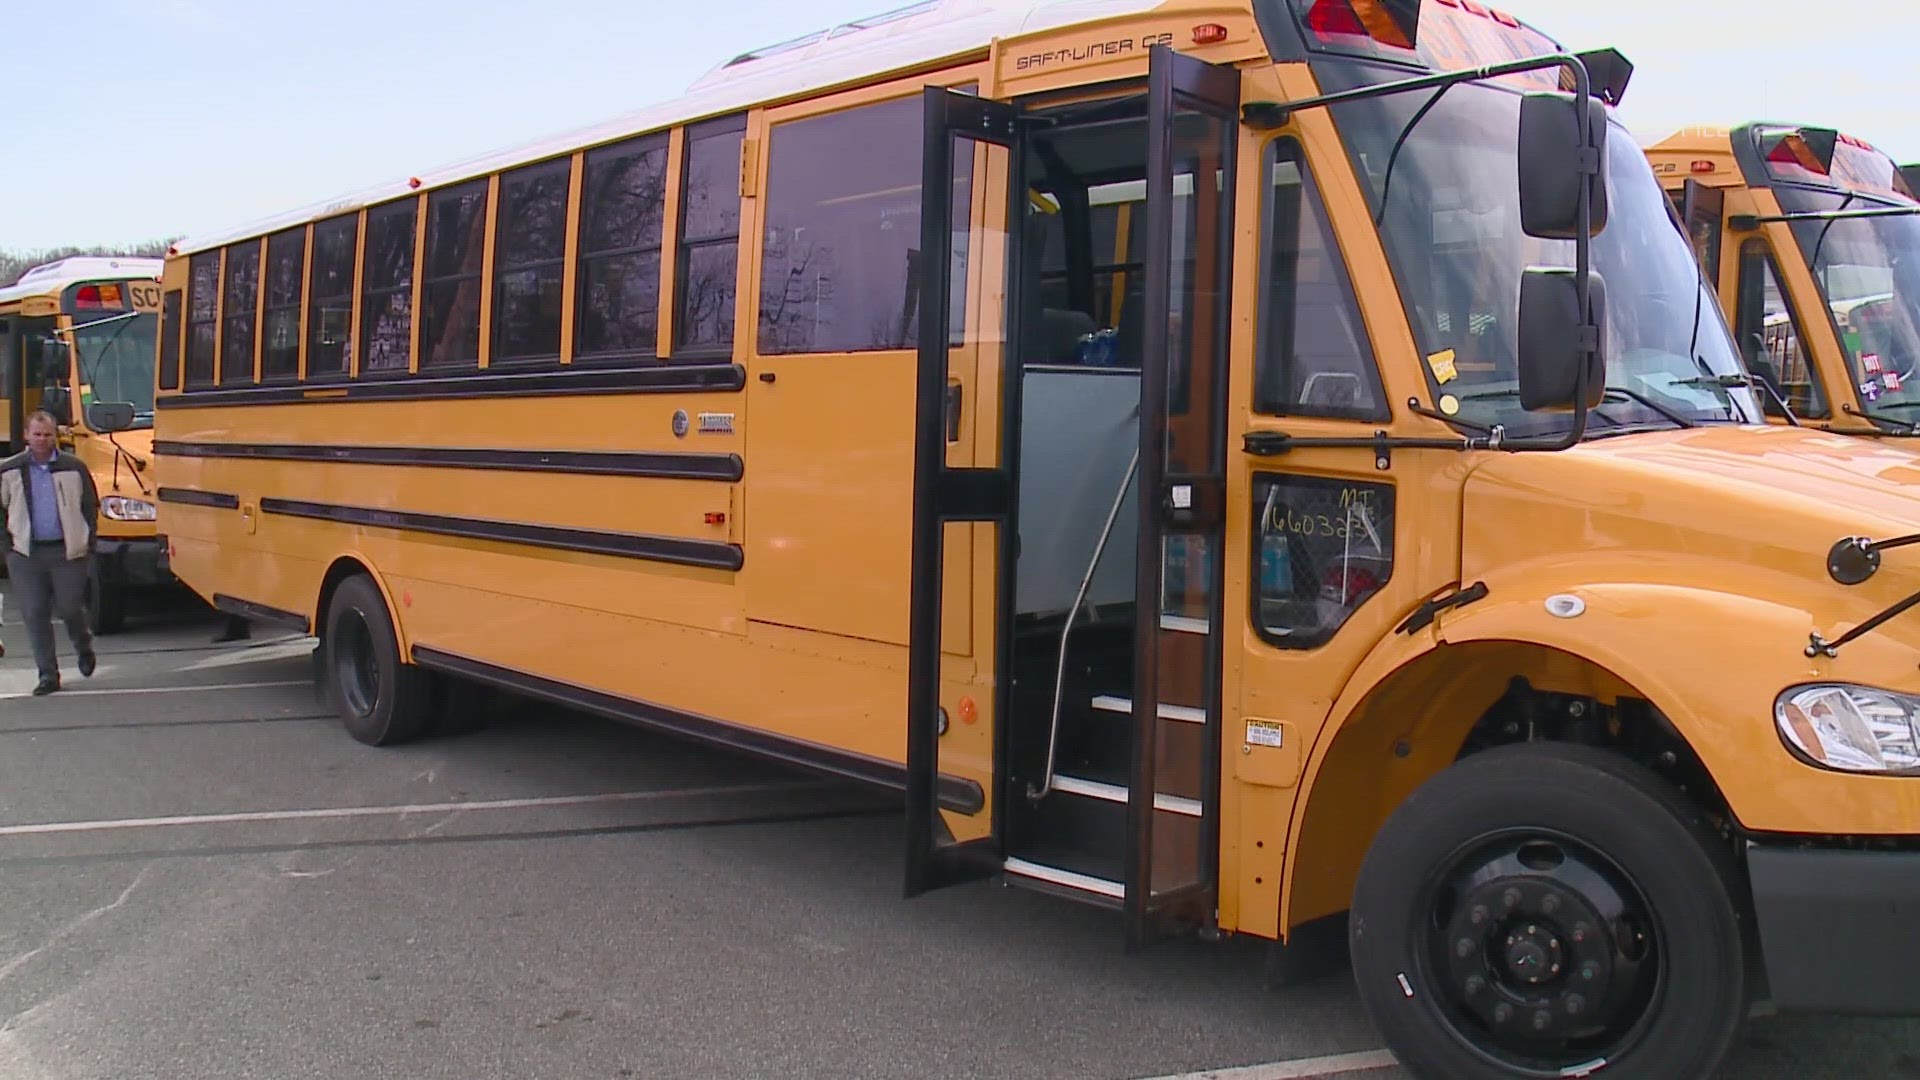 Carolina Thomas will manufacture more than 60 electric buses for districts across the state.